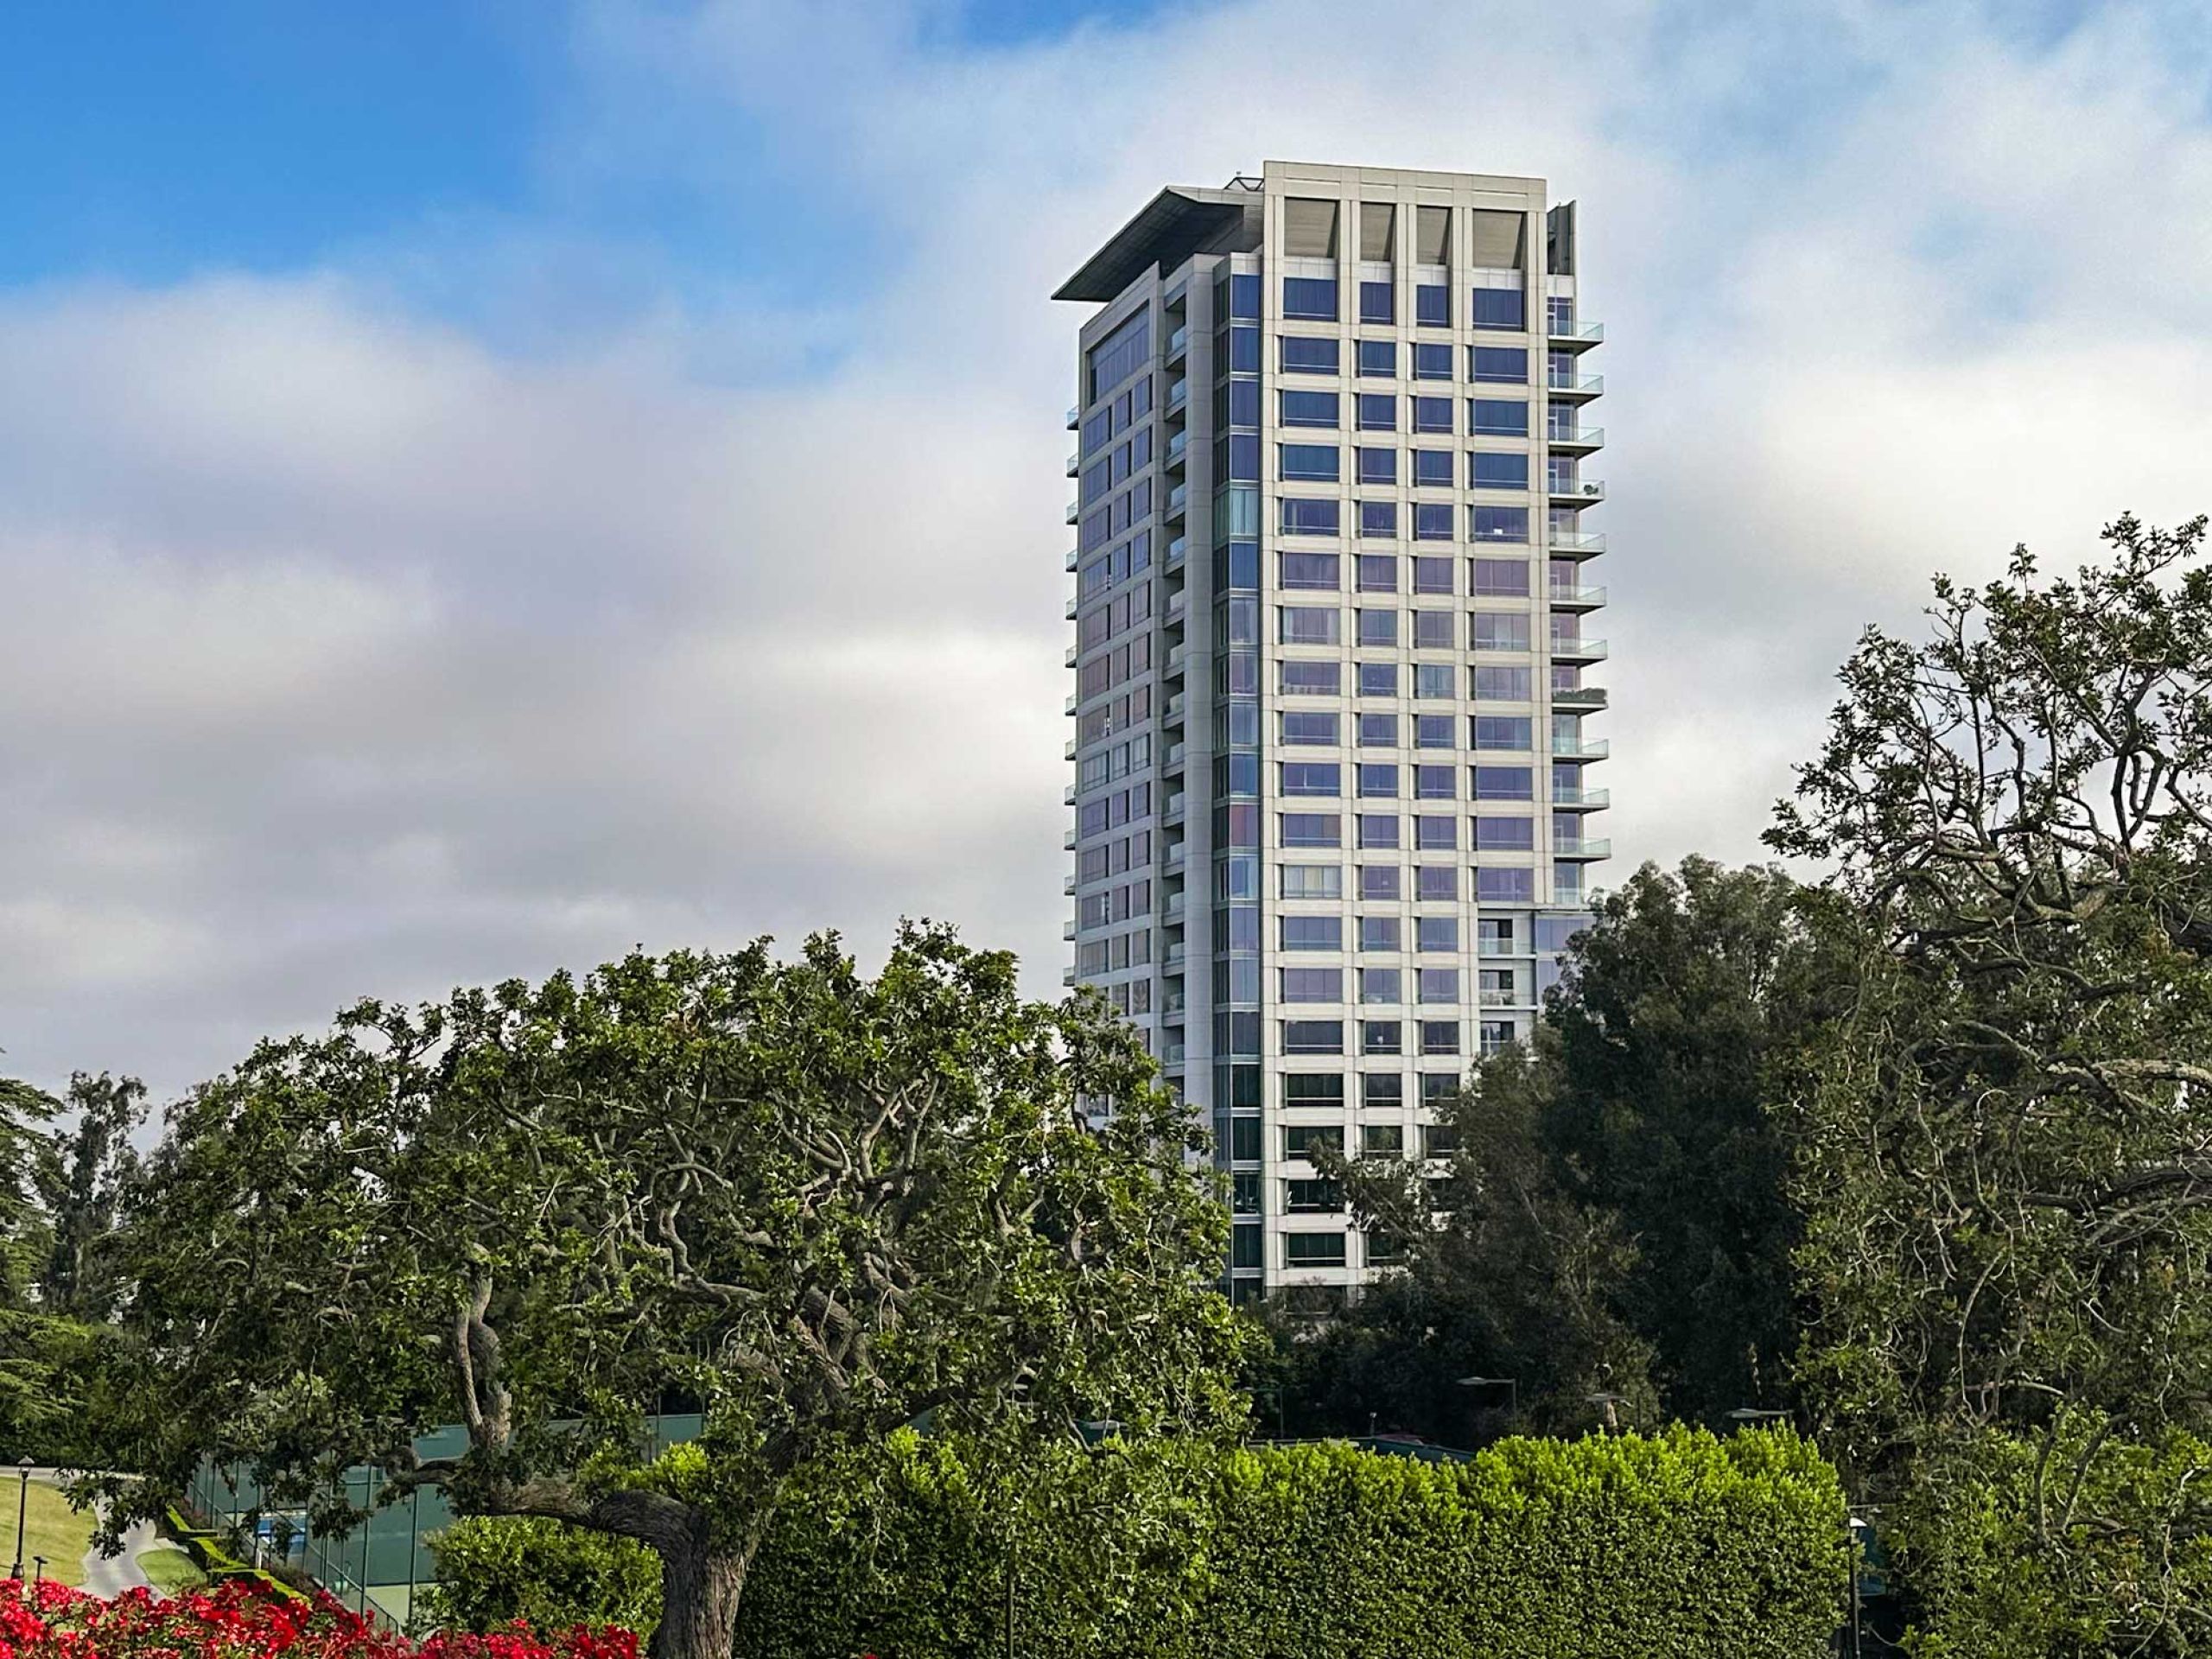 Beverly West Condo Tower